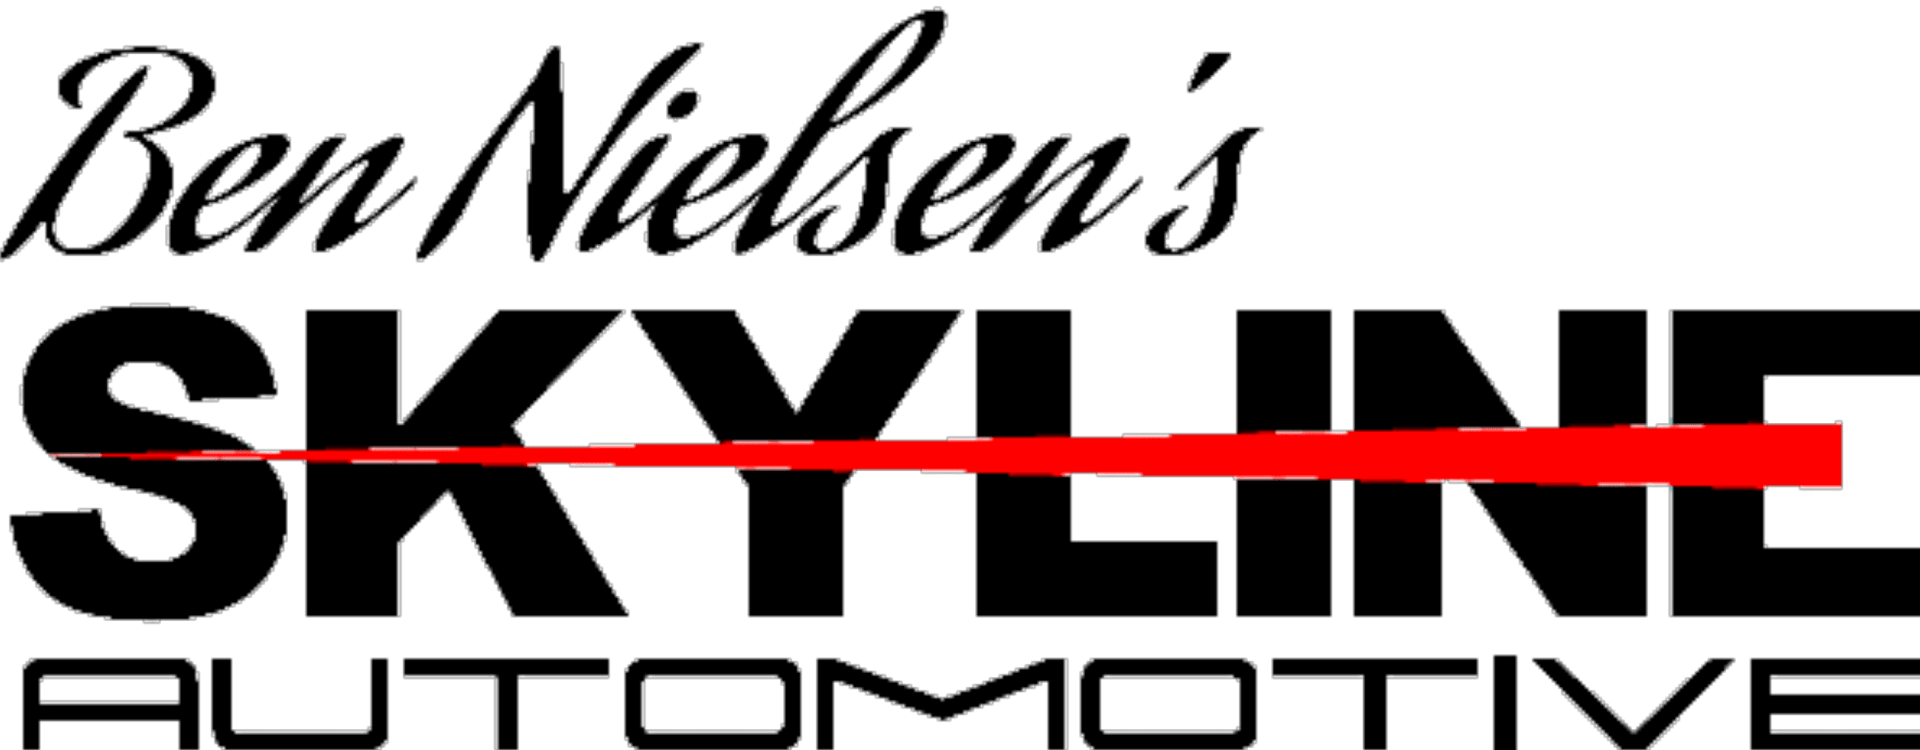 The logo for ben nielsen 's skyline automotive has a red line through it.